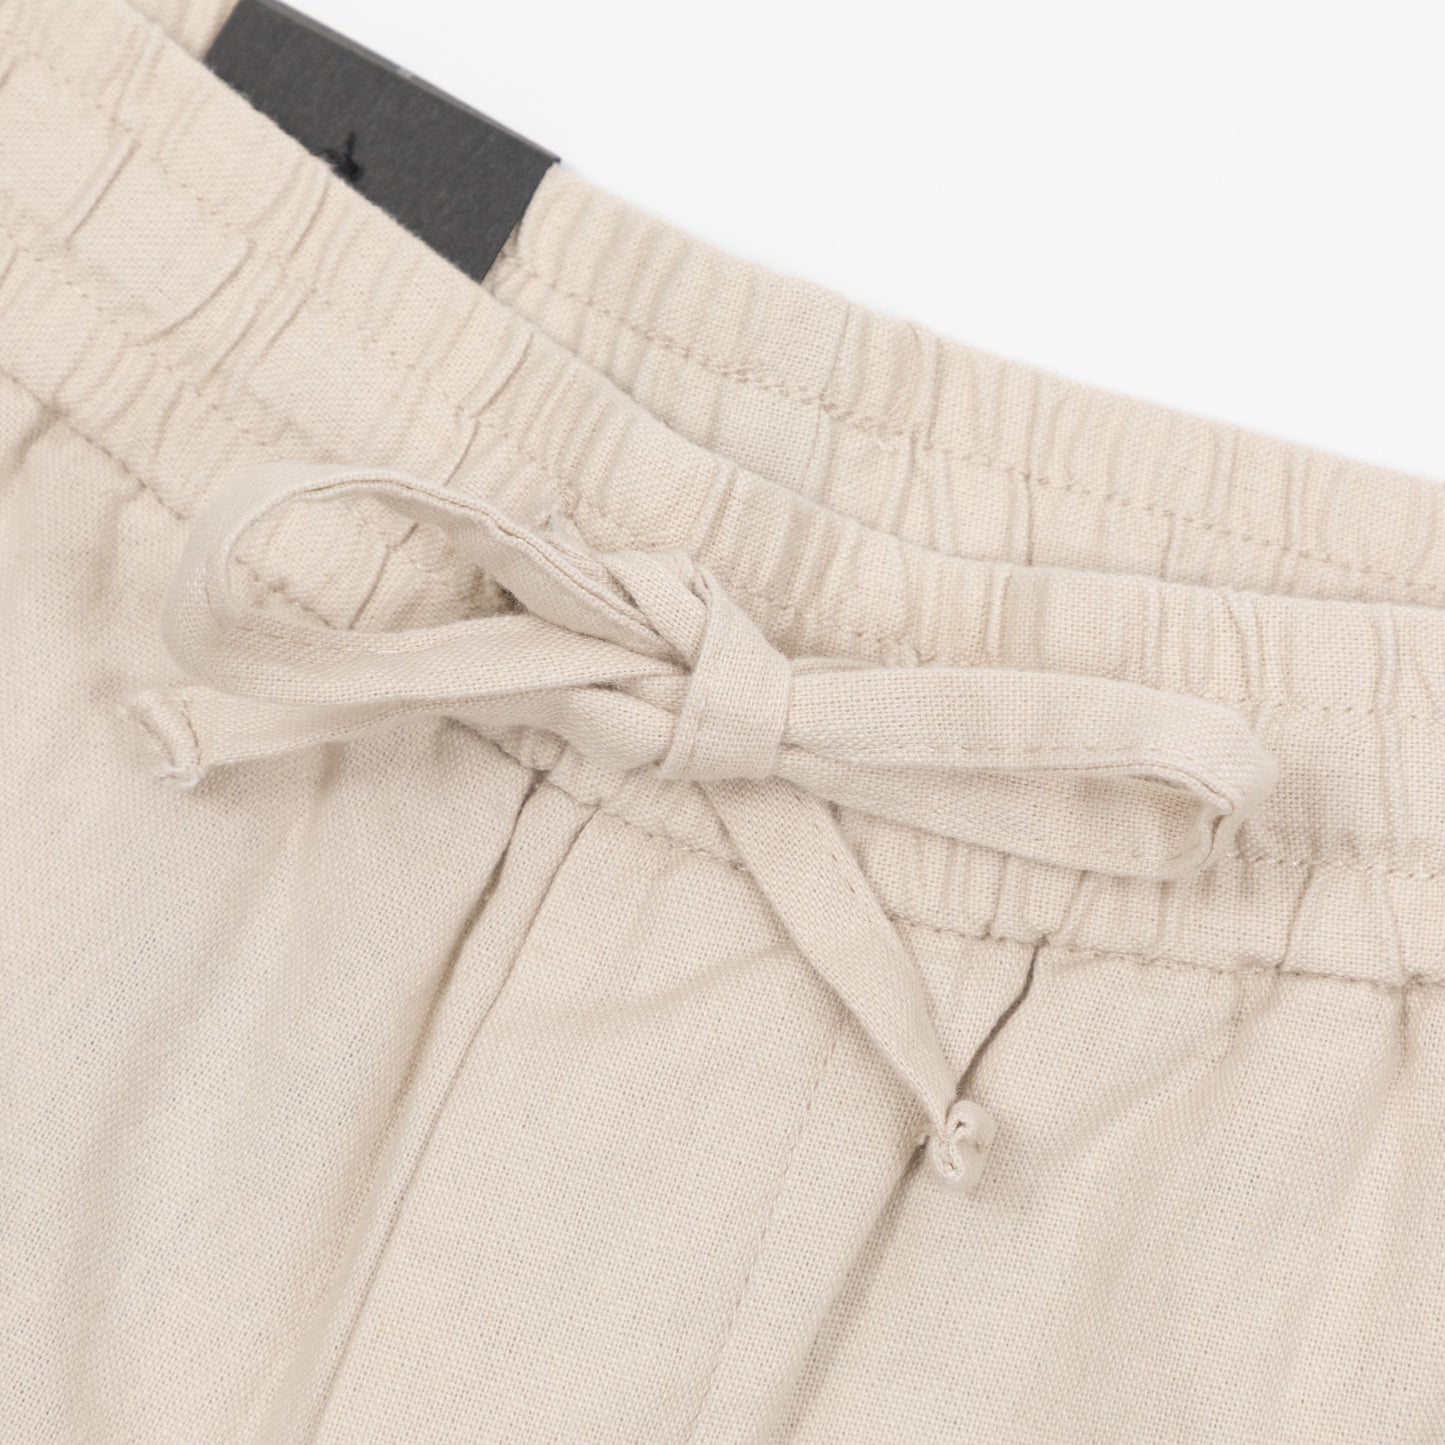 ONLY & SONS Linen Shorts in BEIGE